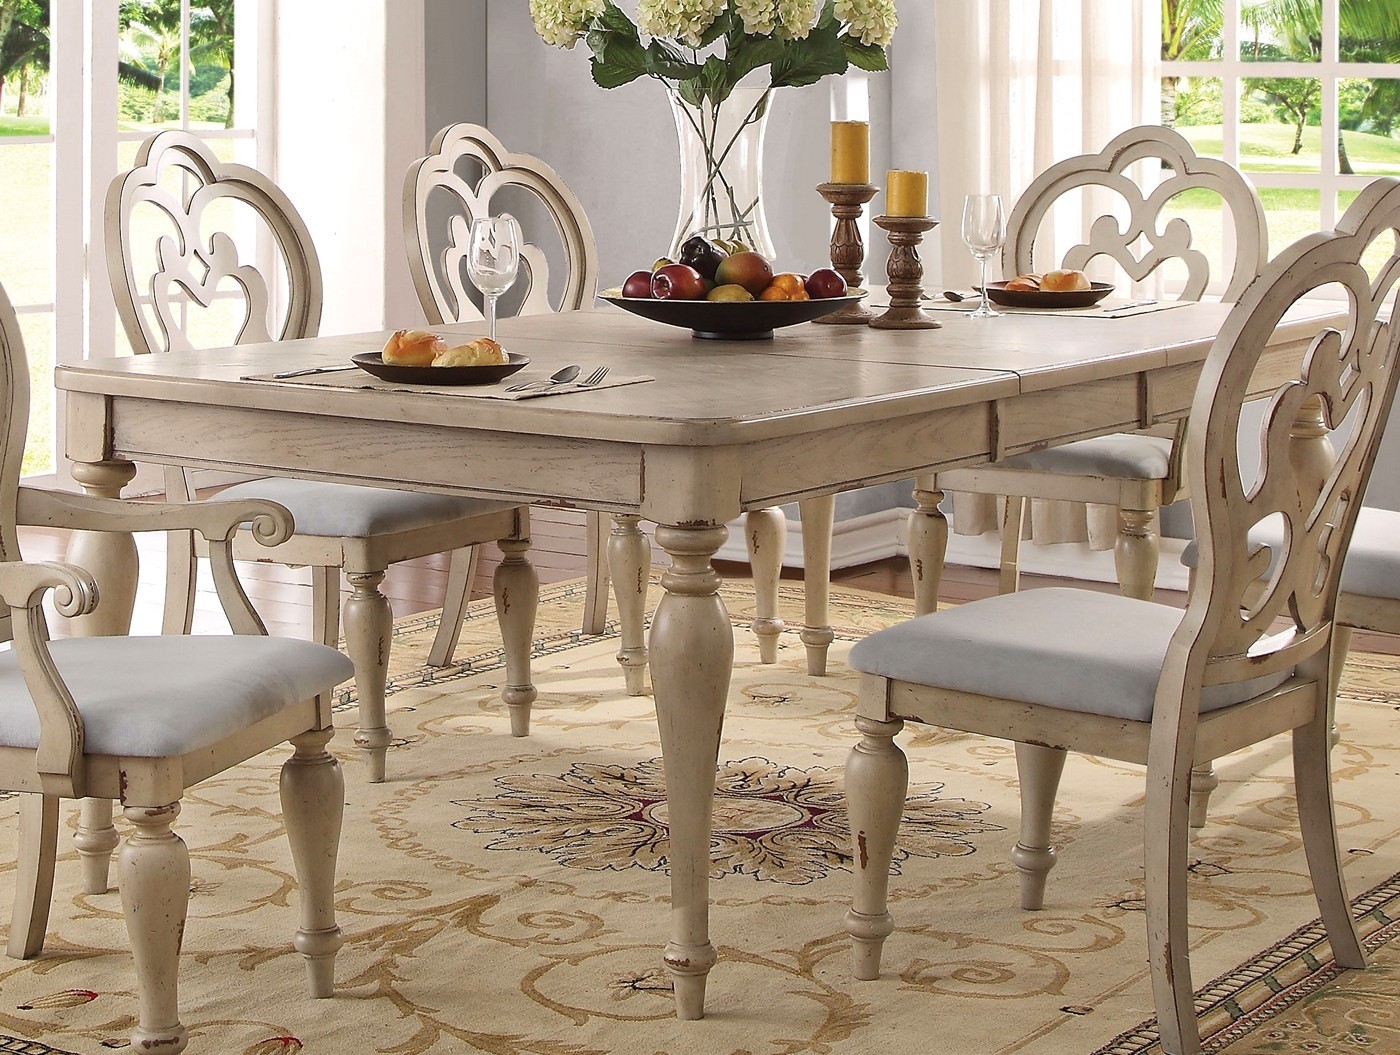 French country dining table set white wood dining room table